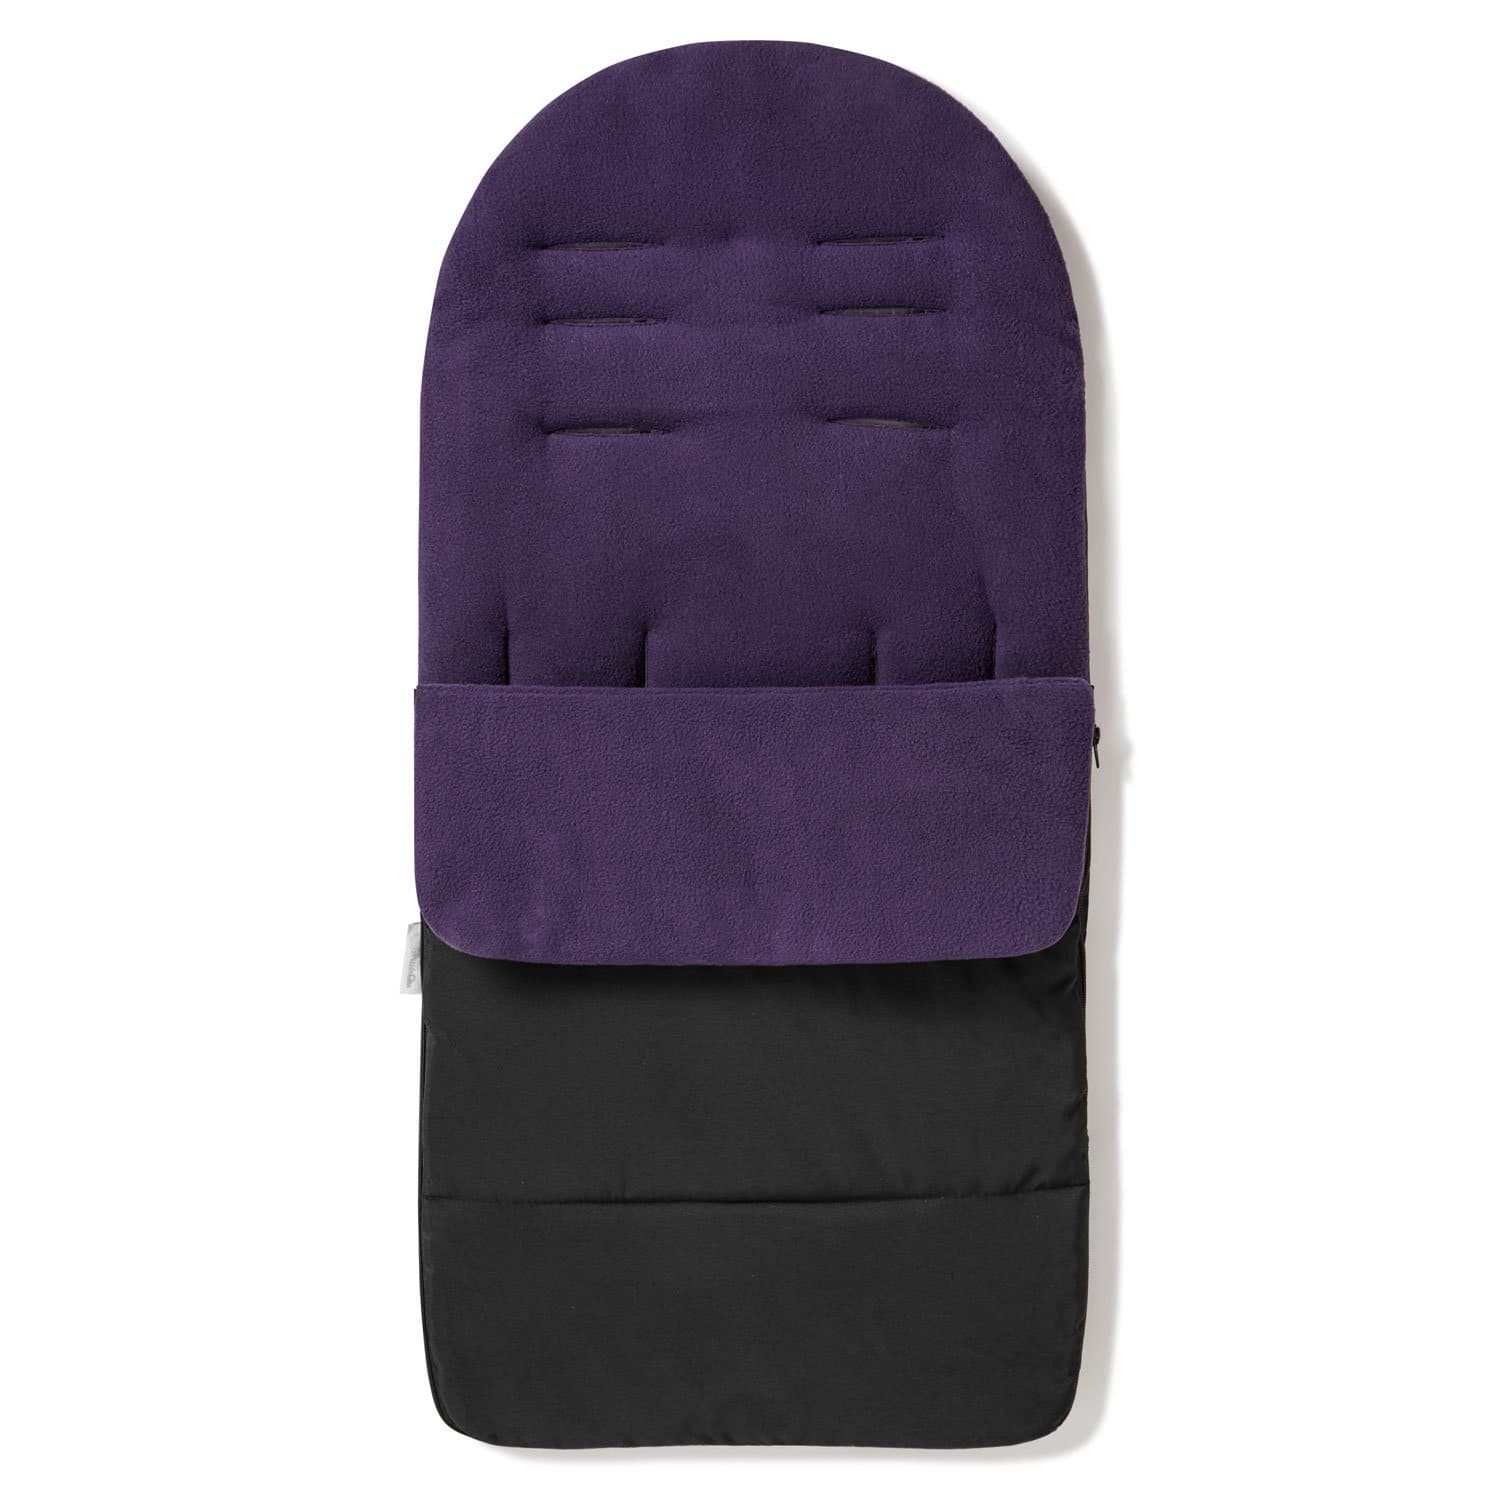 Premium Footmuff / Cosy Toes Compatible with Brio - Plum Purple / Fits All Models | For Your Little One